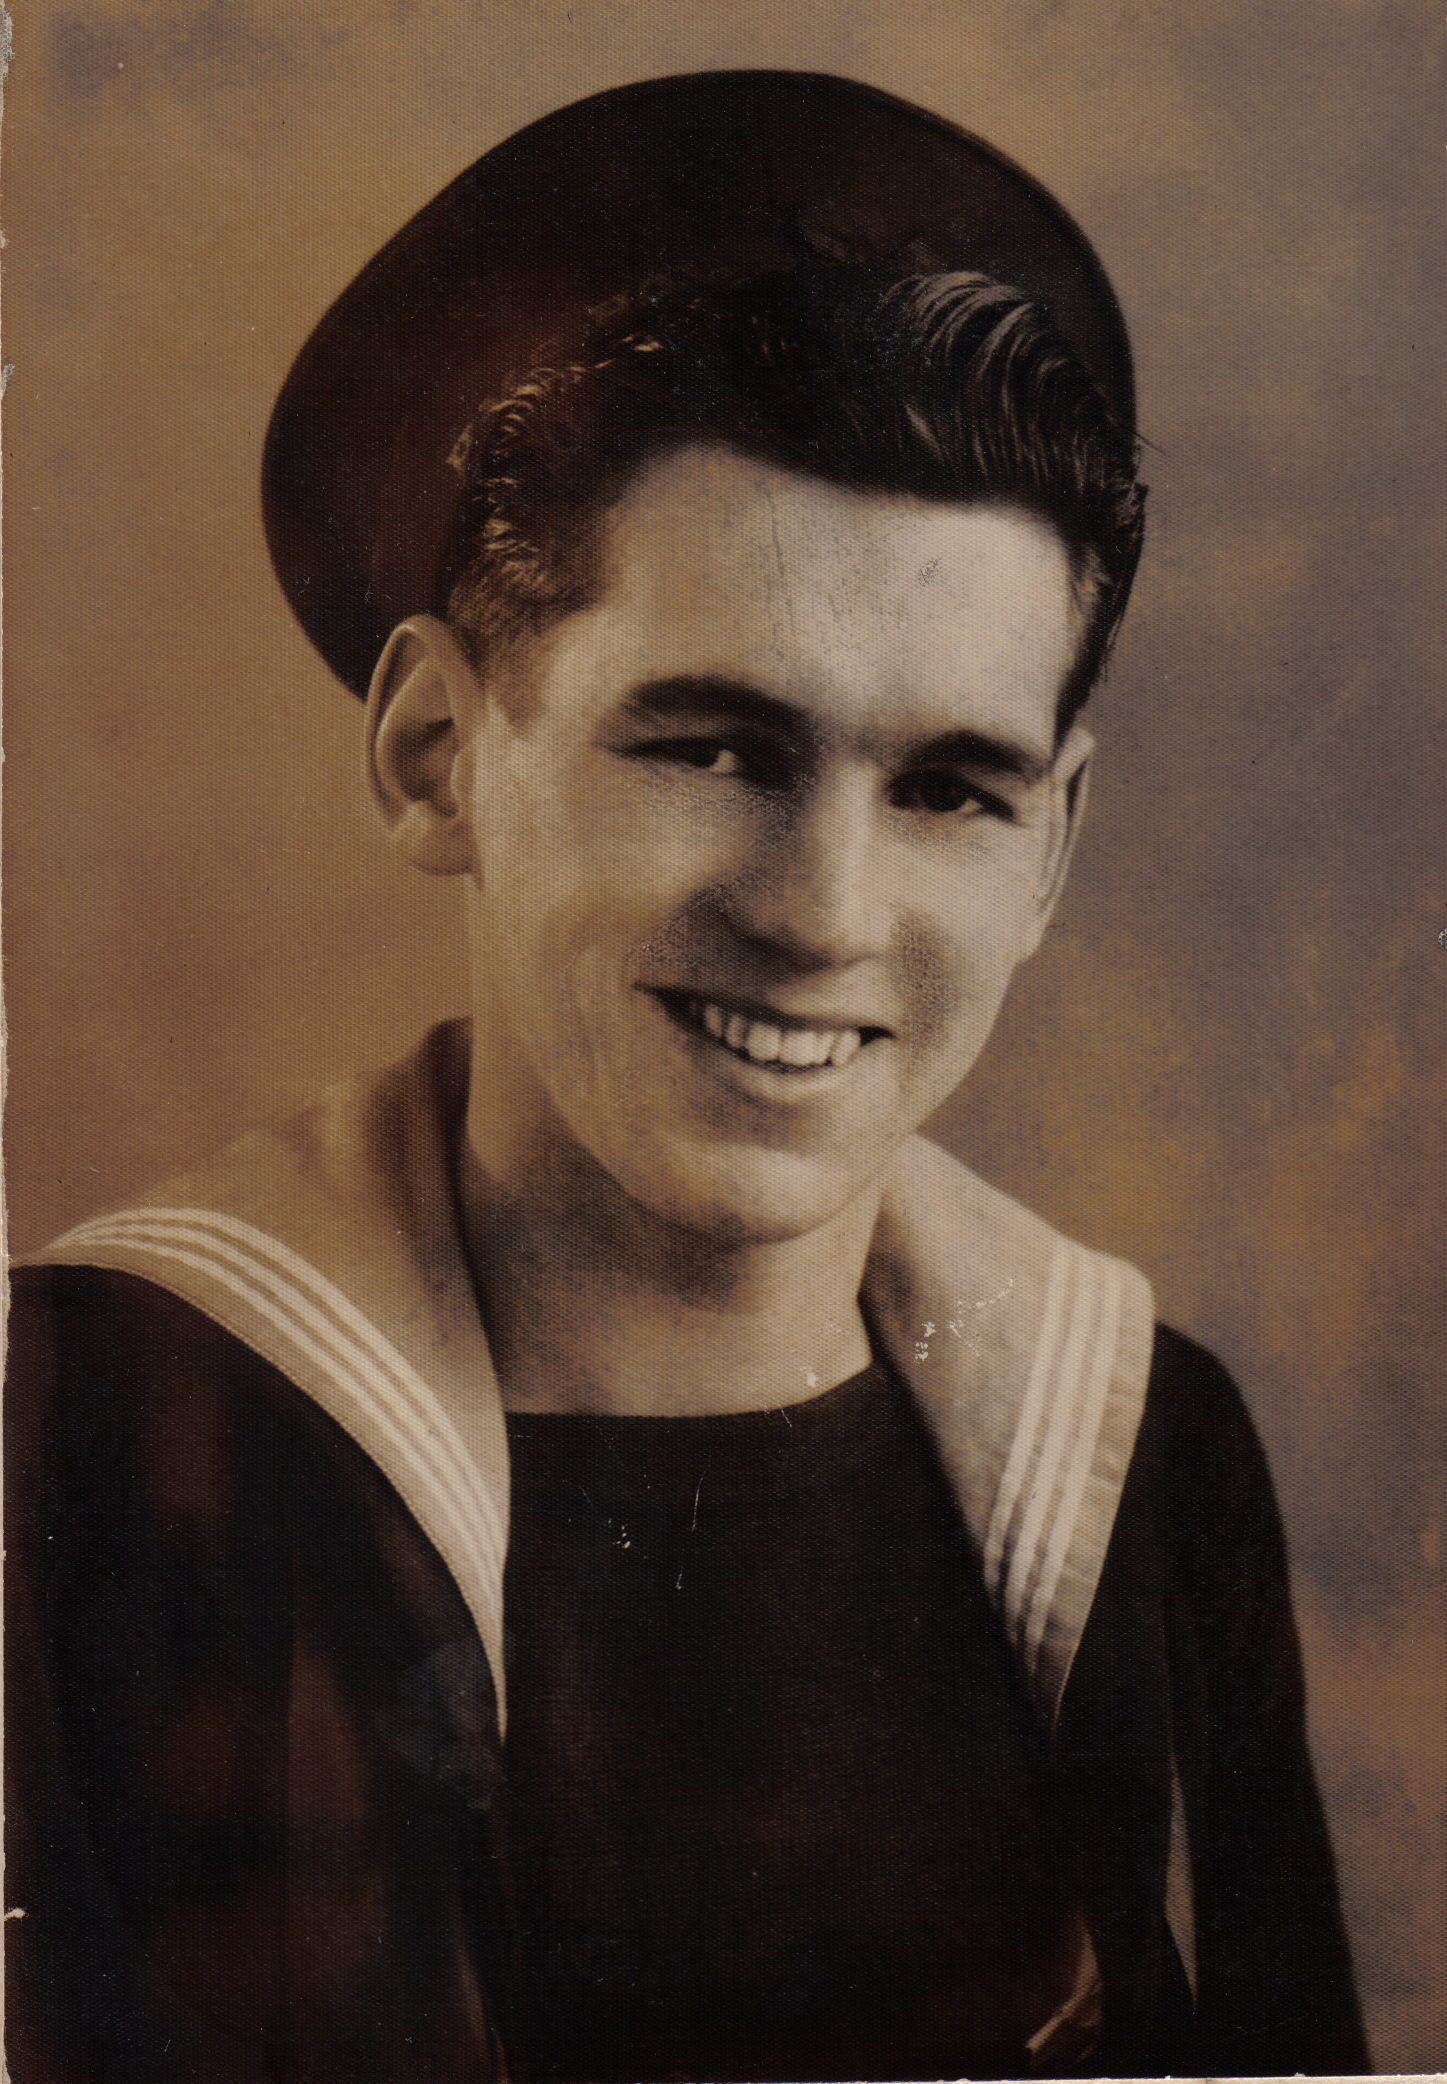 PHOTO: Jim Radford, here pictured as a sailor in the Royal Navy when he was 18, was just 15 years old when he served during the D-Day landings.